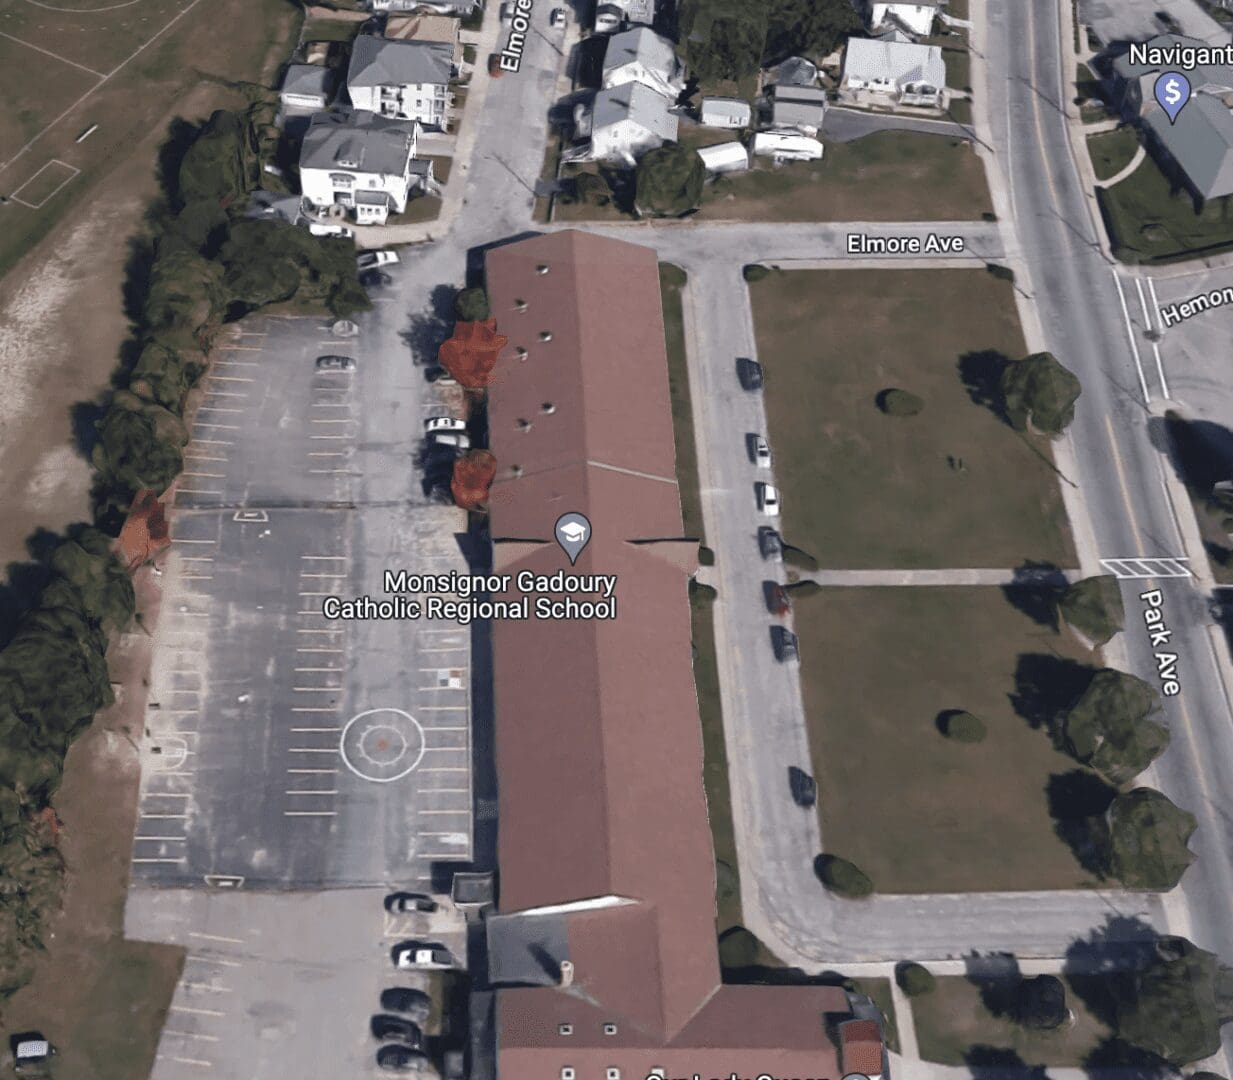 An aerial view of a parking lot and a building in Rhode Island.